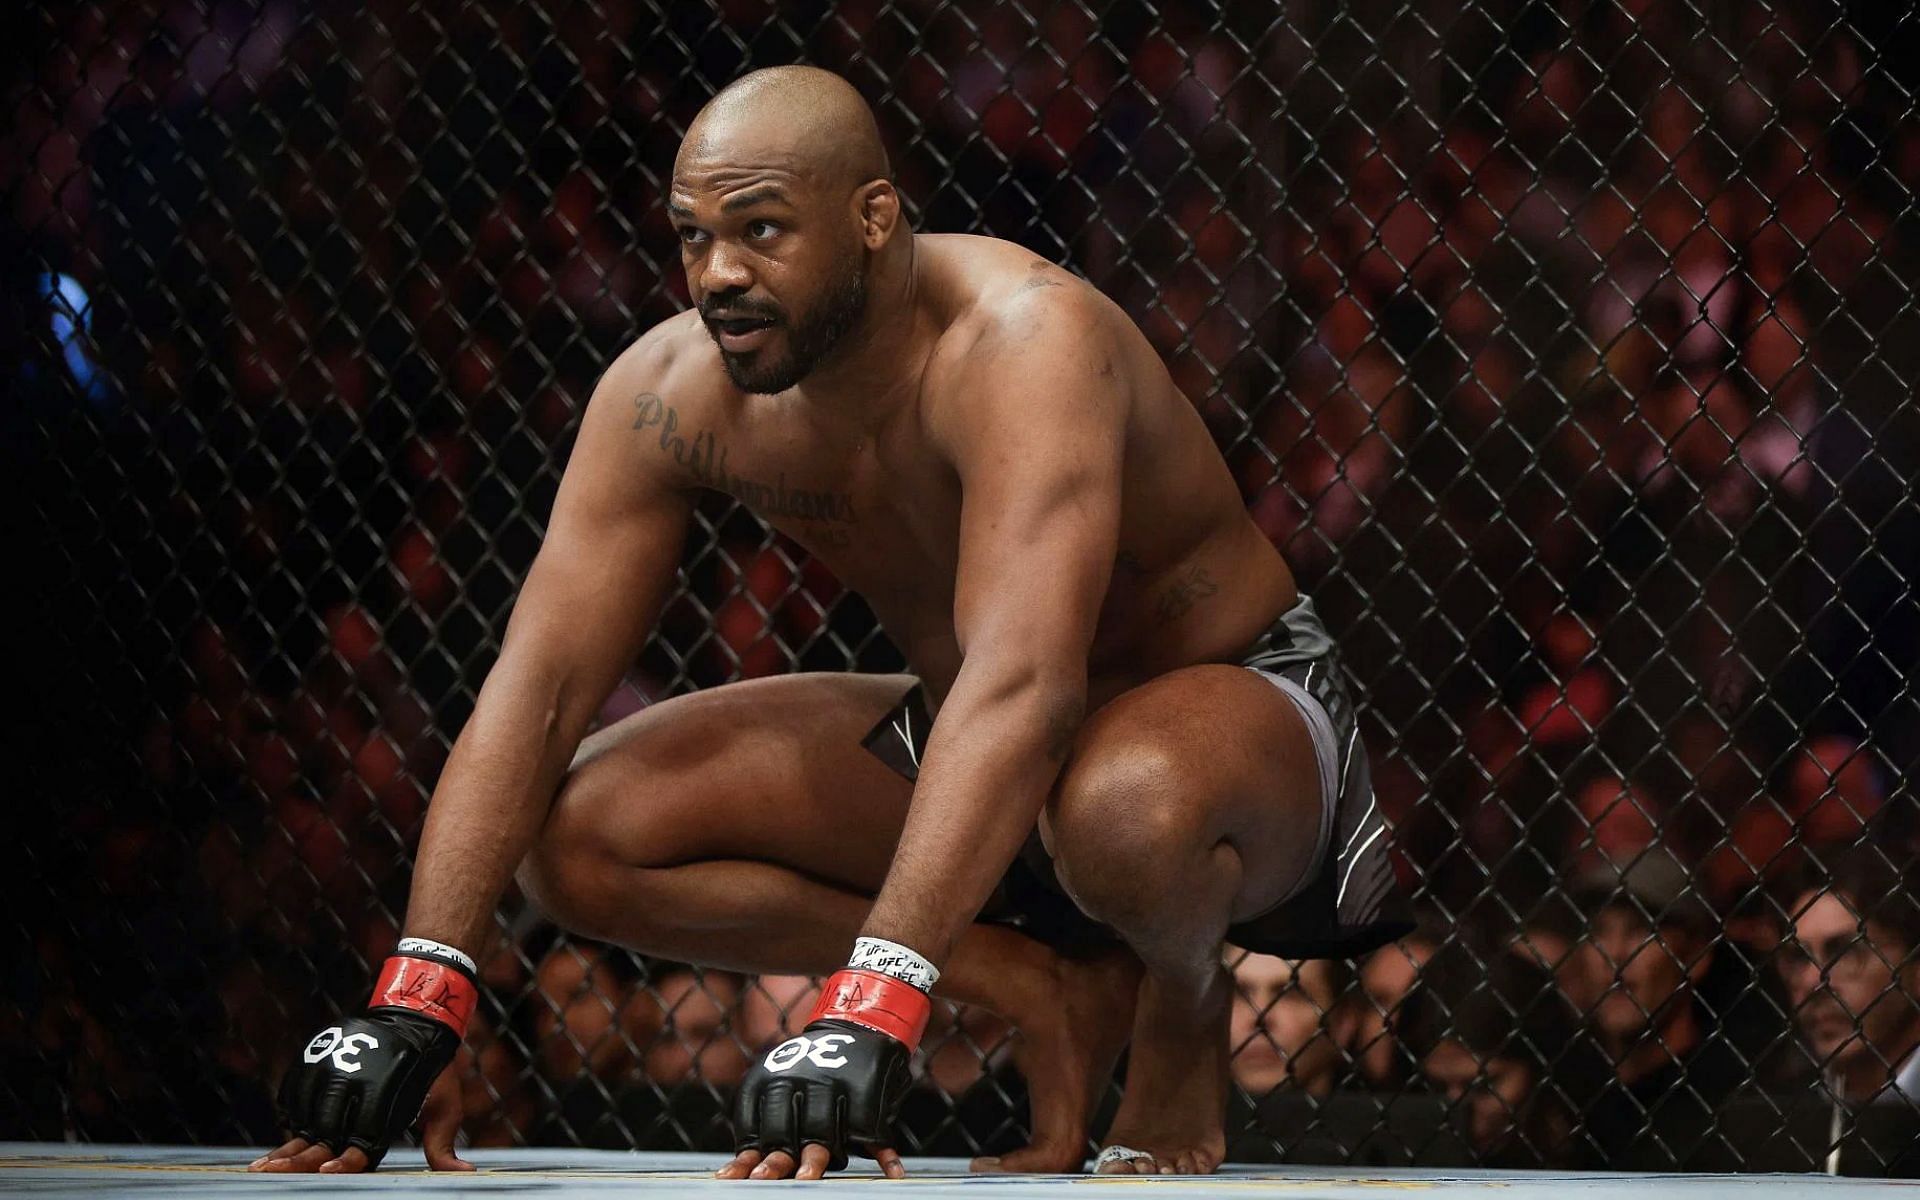 UFC heavyweight champion Jon Jones (pictured) shares DM with fan as he allegedly reveals his fight purse for Stipe Miocic clash [Image Courtesy: @GettyImages]